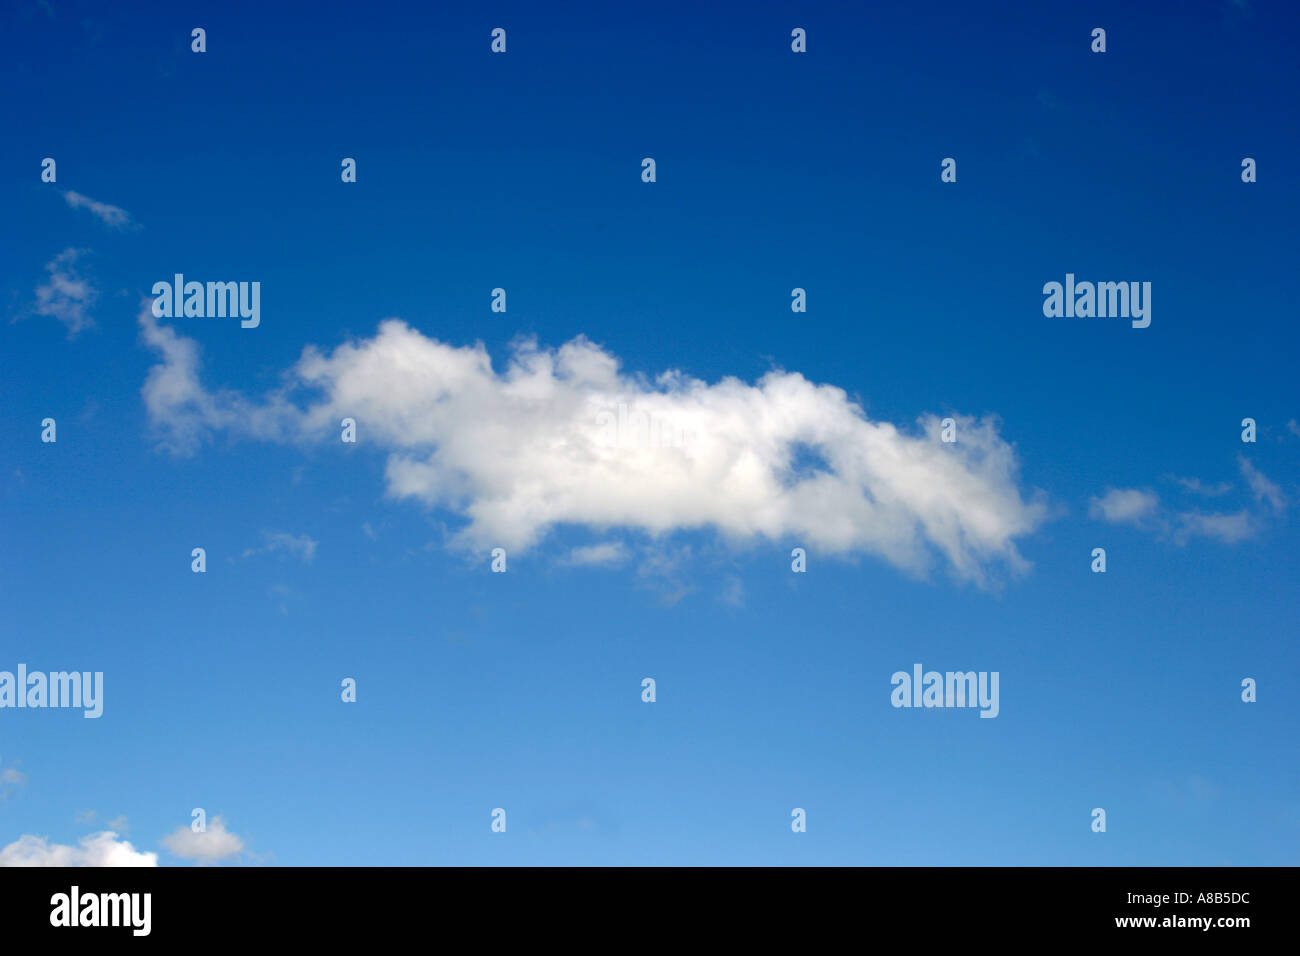 BLUE SKY SCAPE WITH WHITE CLOUDS Stock Photo